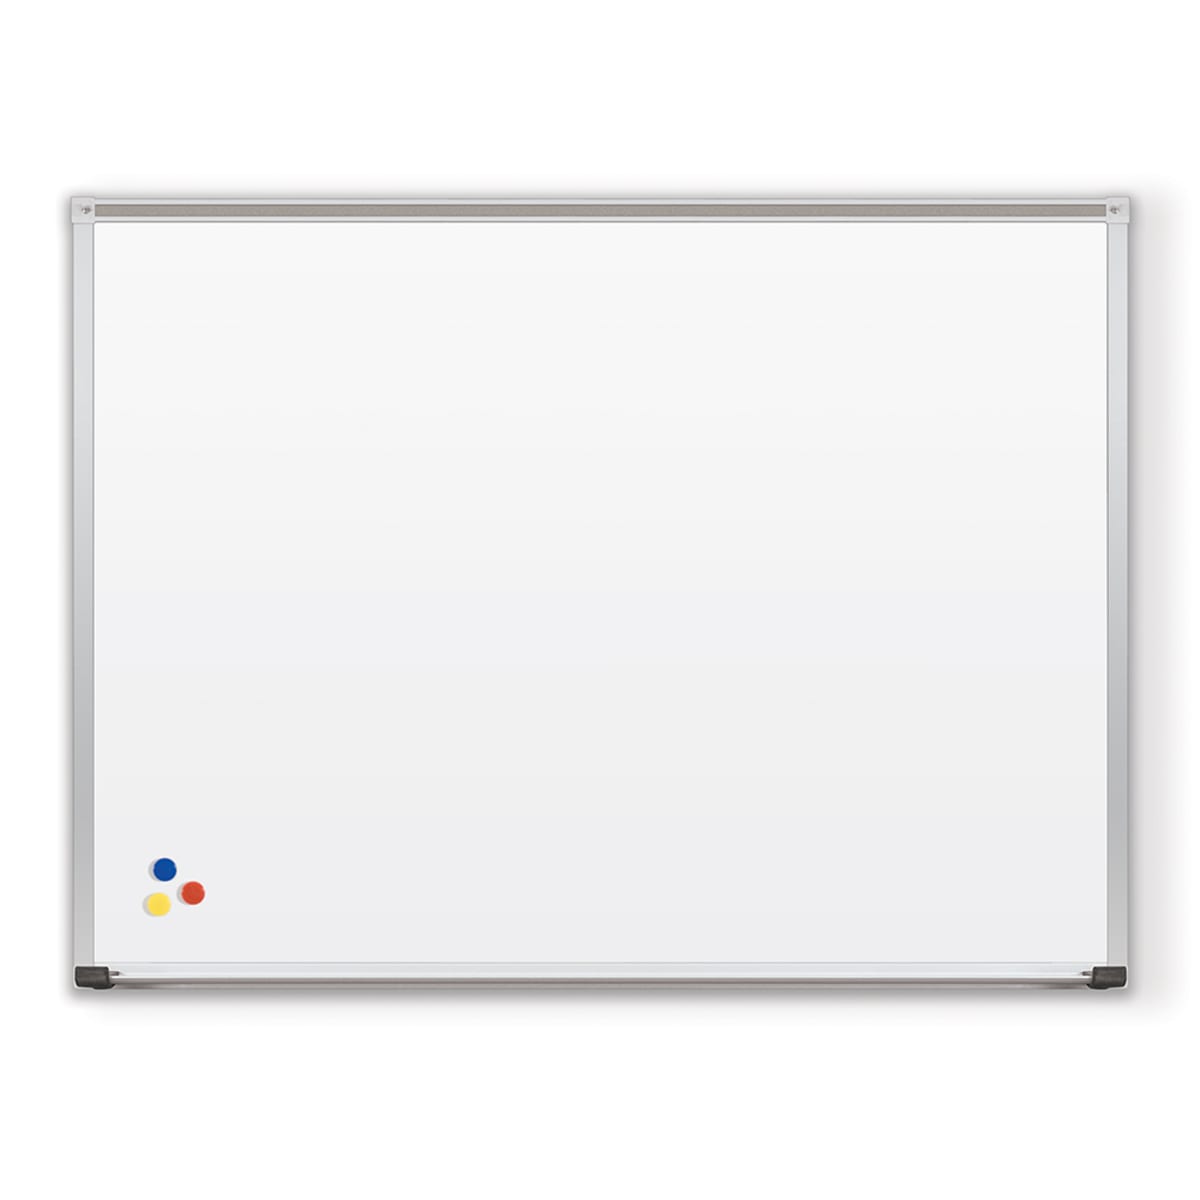 Mooreco Porcelain Markerboard with Deluxe Aluminum Trim - 4'H x 10'W (Mooreco 202AK) - SchoolOutlet